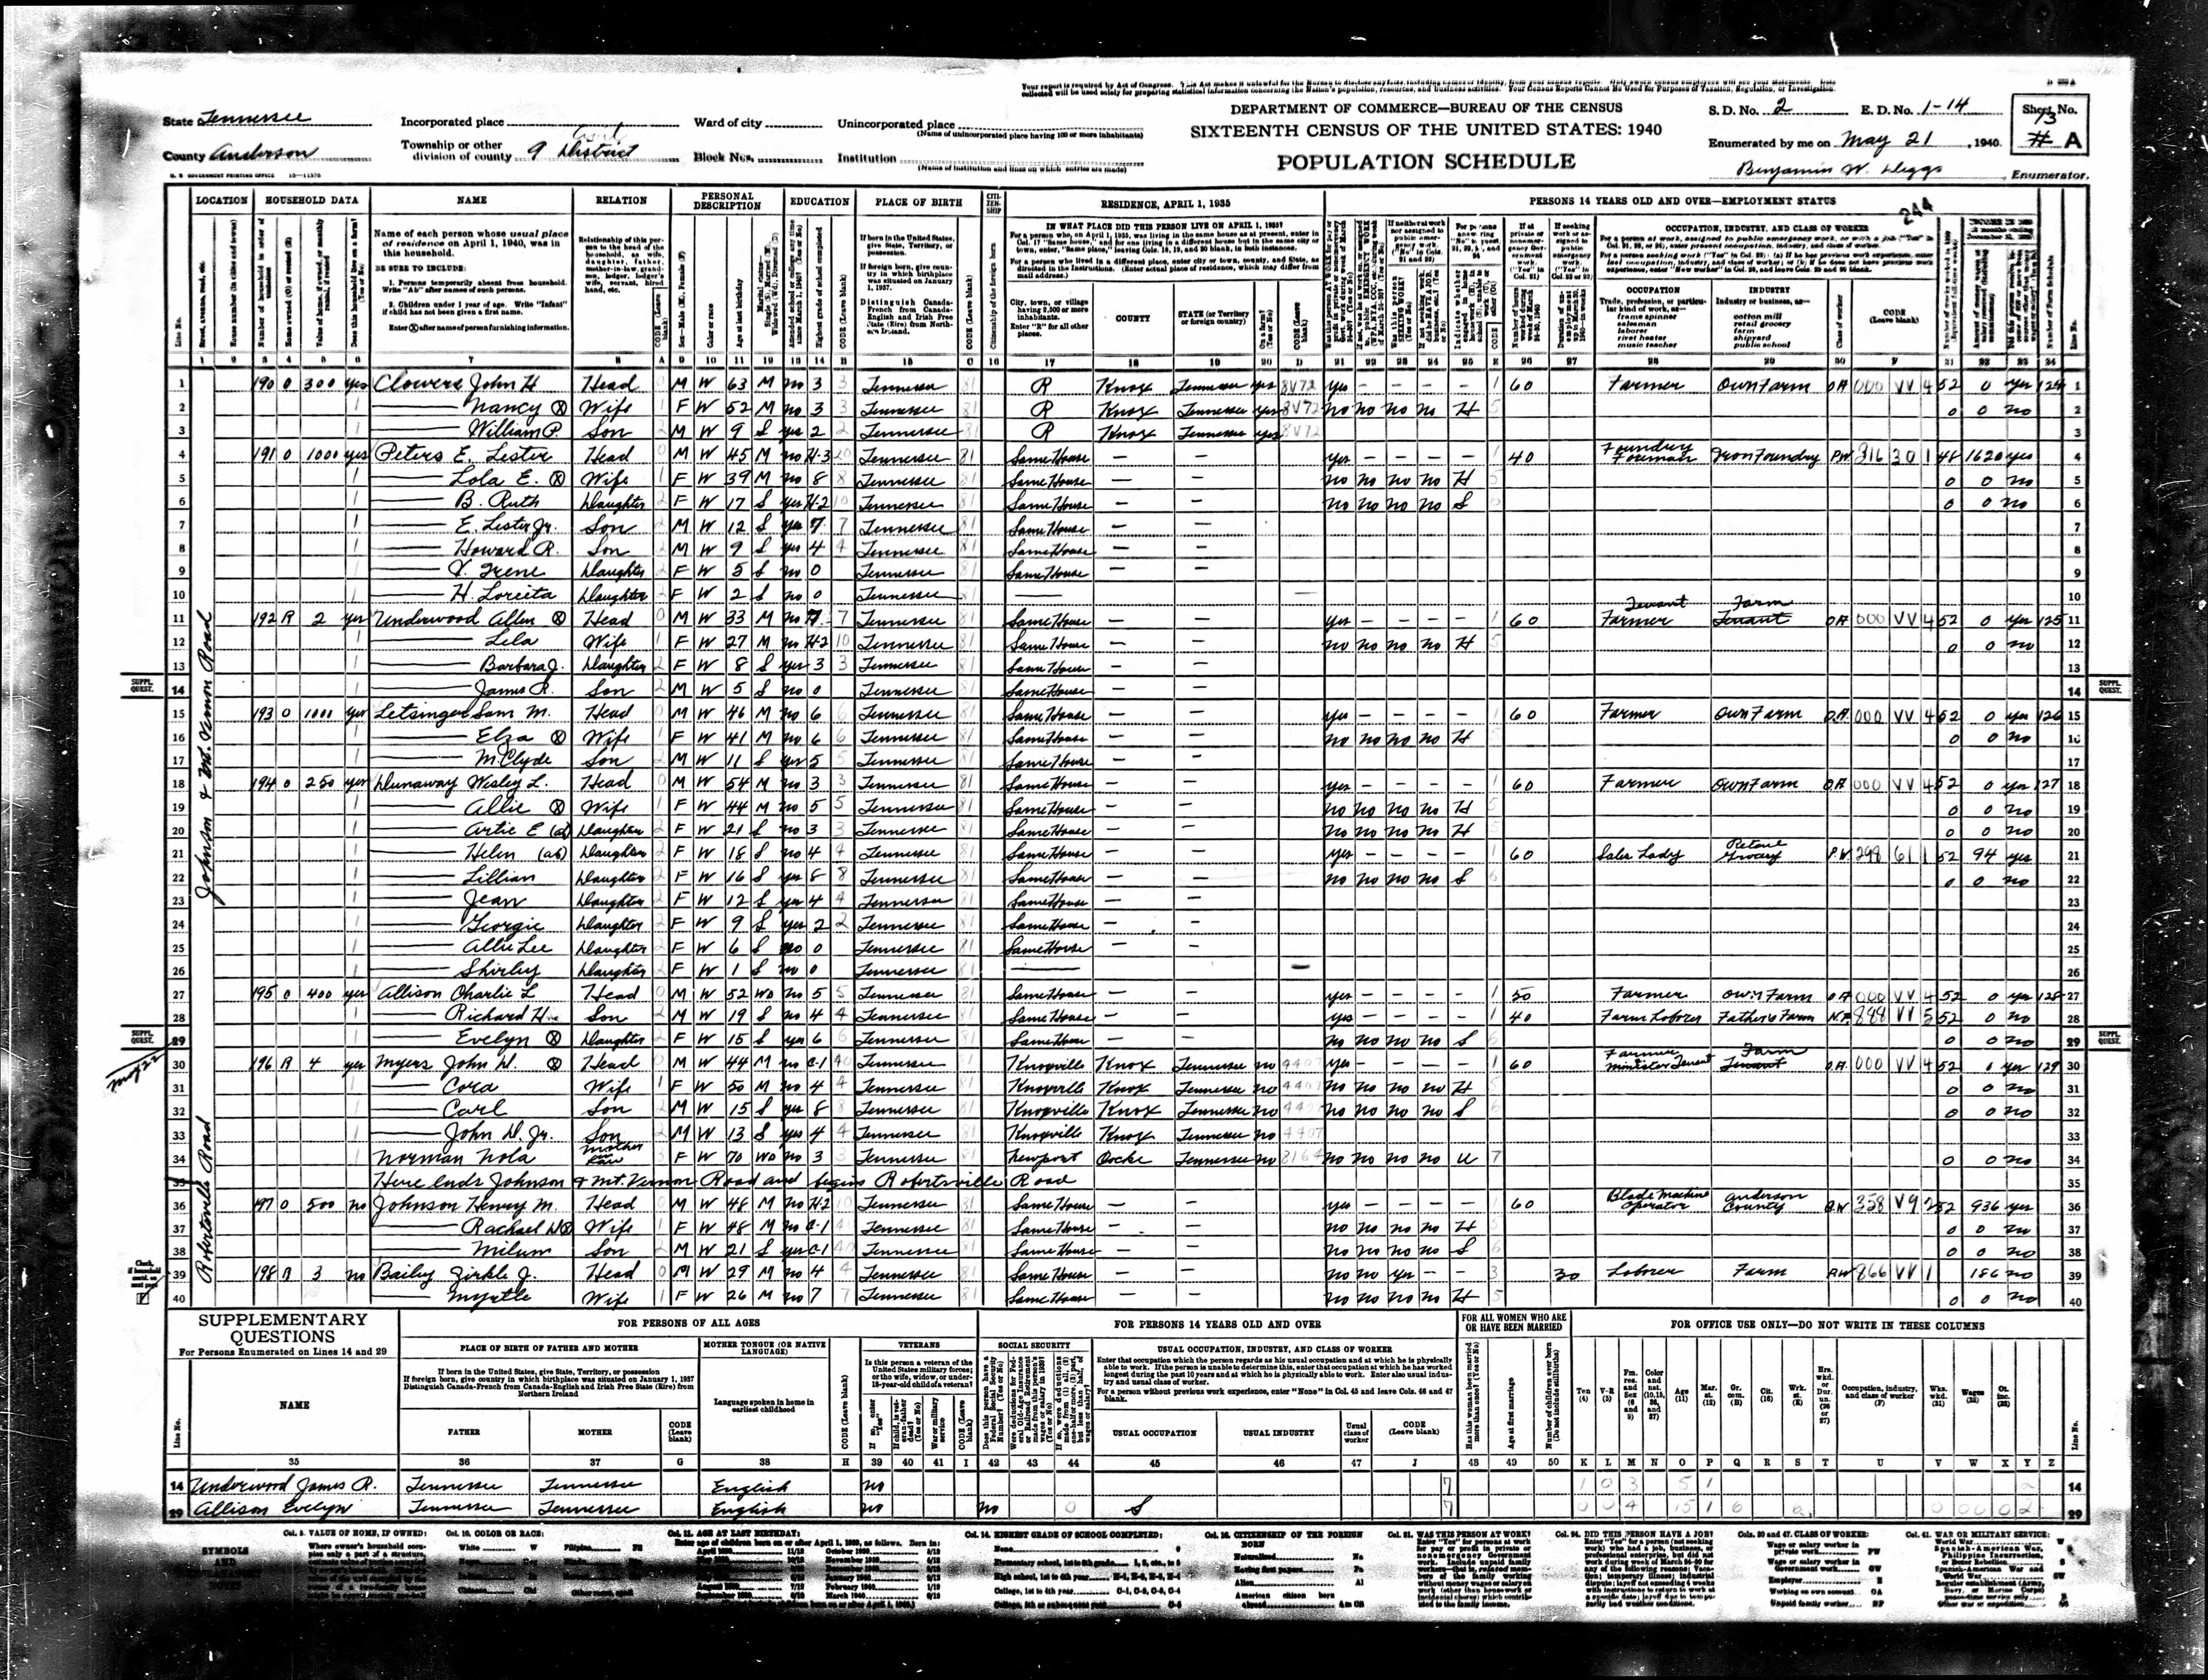 1940 U.S. Census, Anderson County, Tennessee, Dist. 9, page 244a